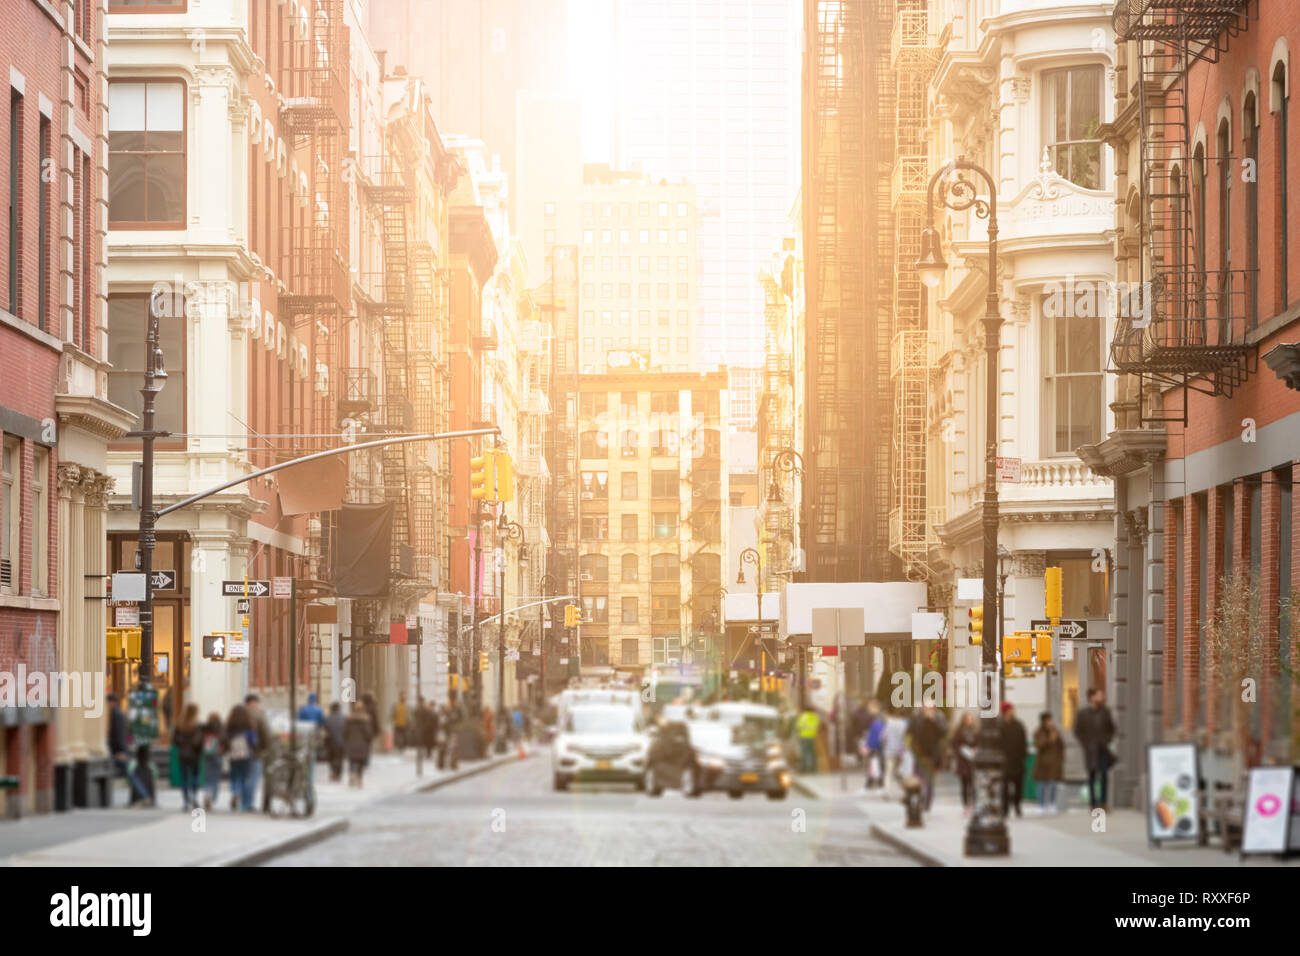 Busy intersection of Broome and Greene Streets is crowded with people and cars in the SoHo neighborhood of New York City with sunlight background Stock Photo